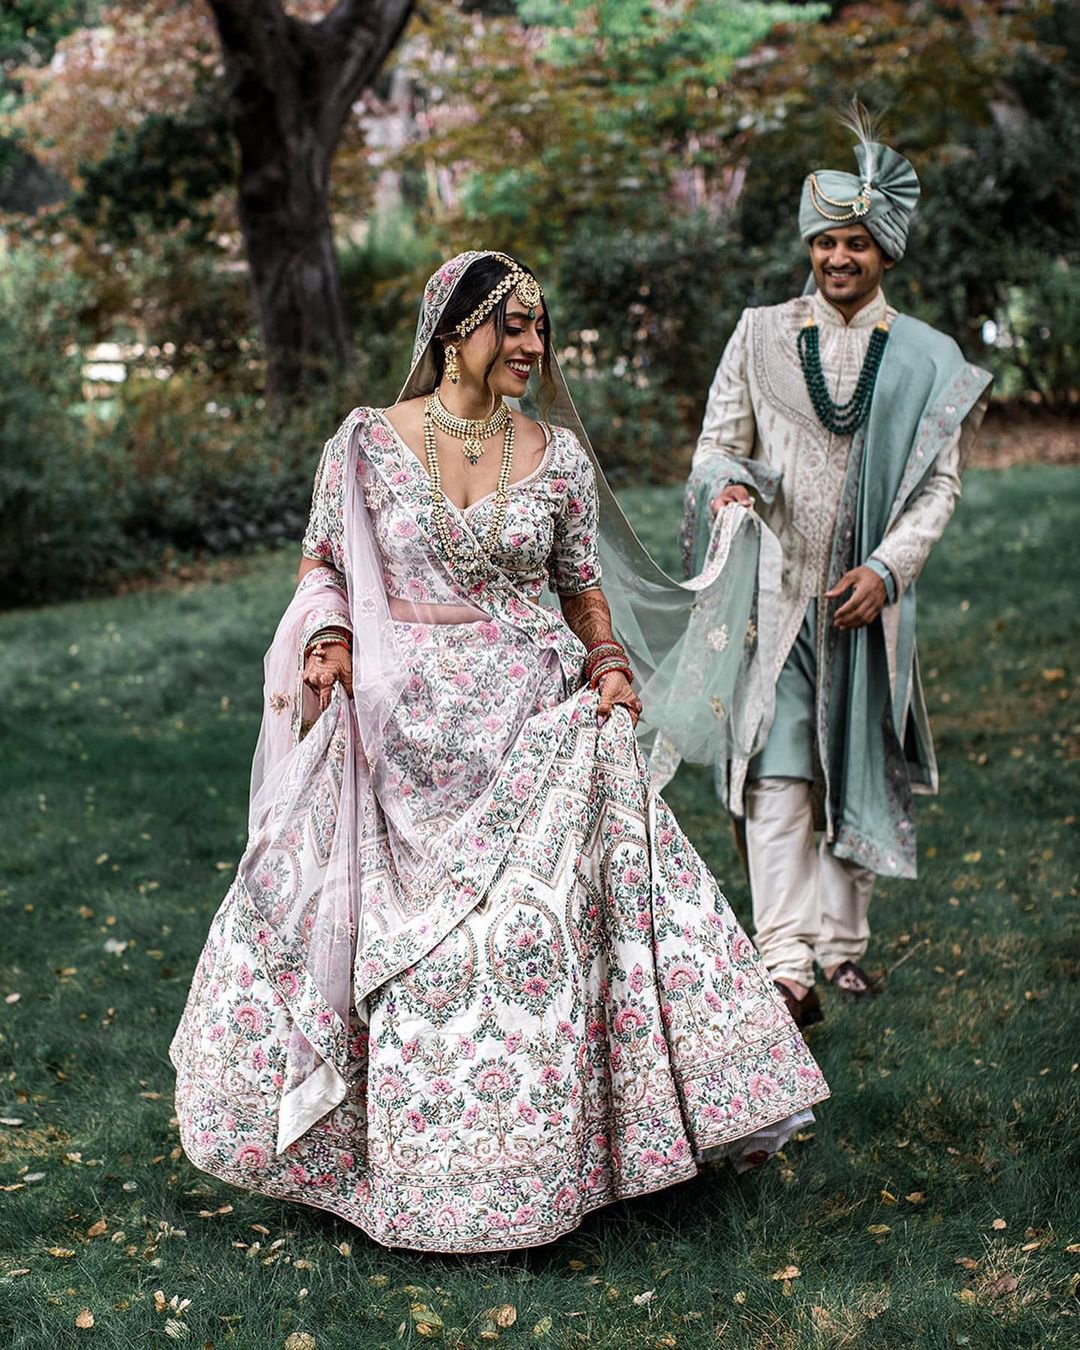 traditional north indian wedding dress